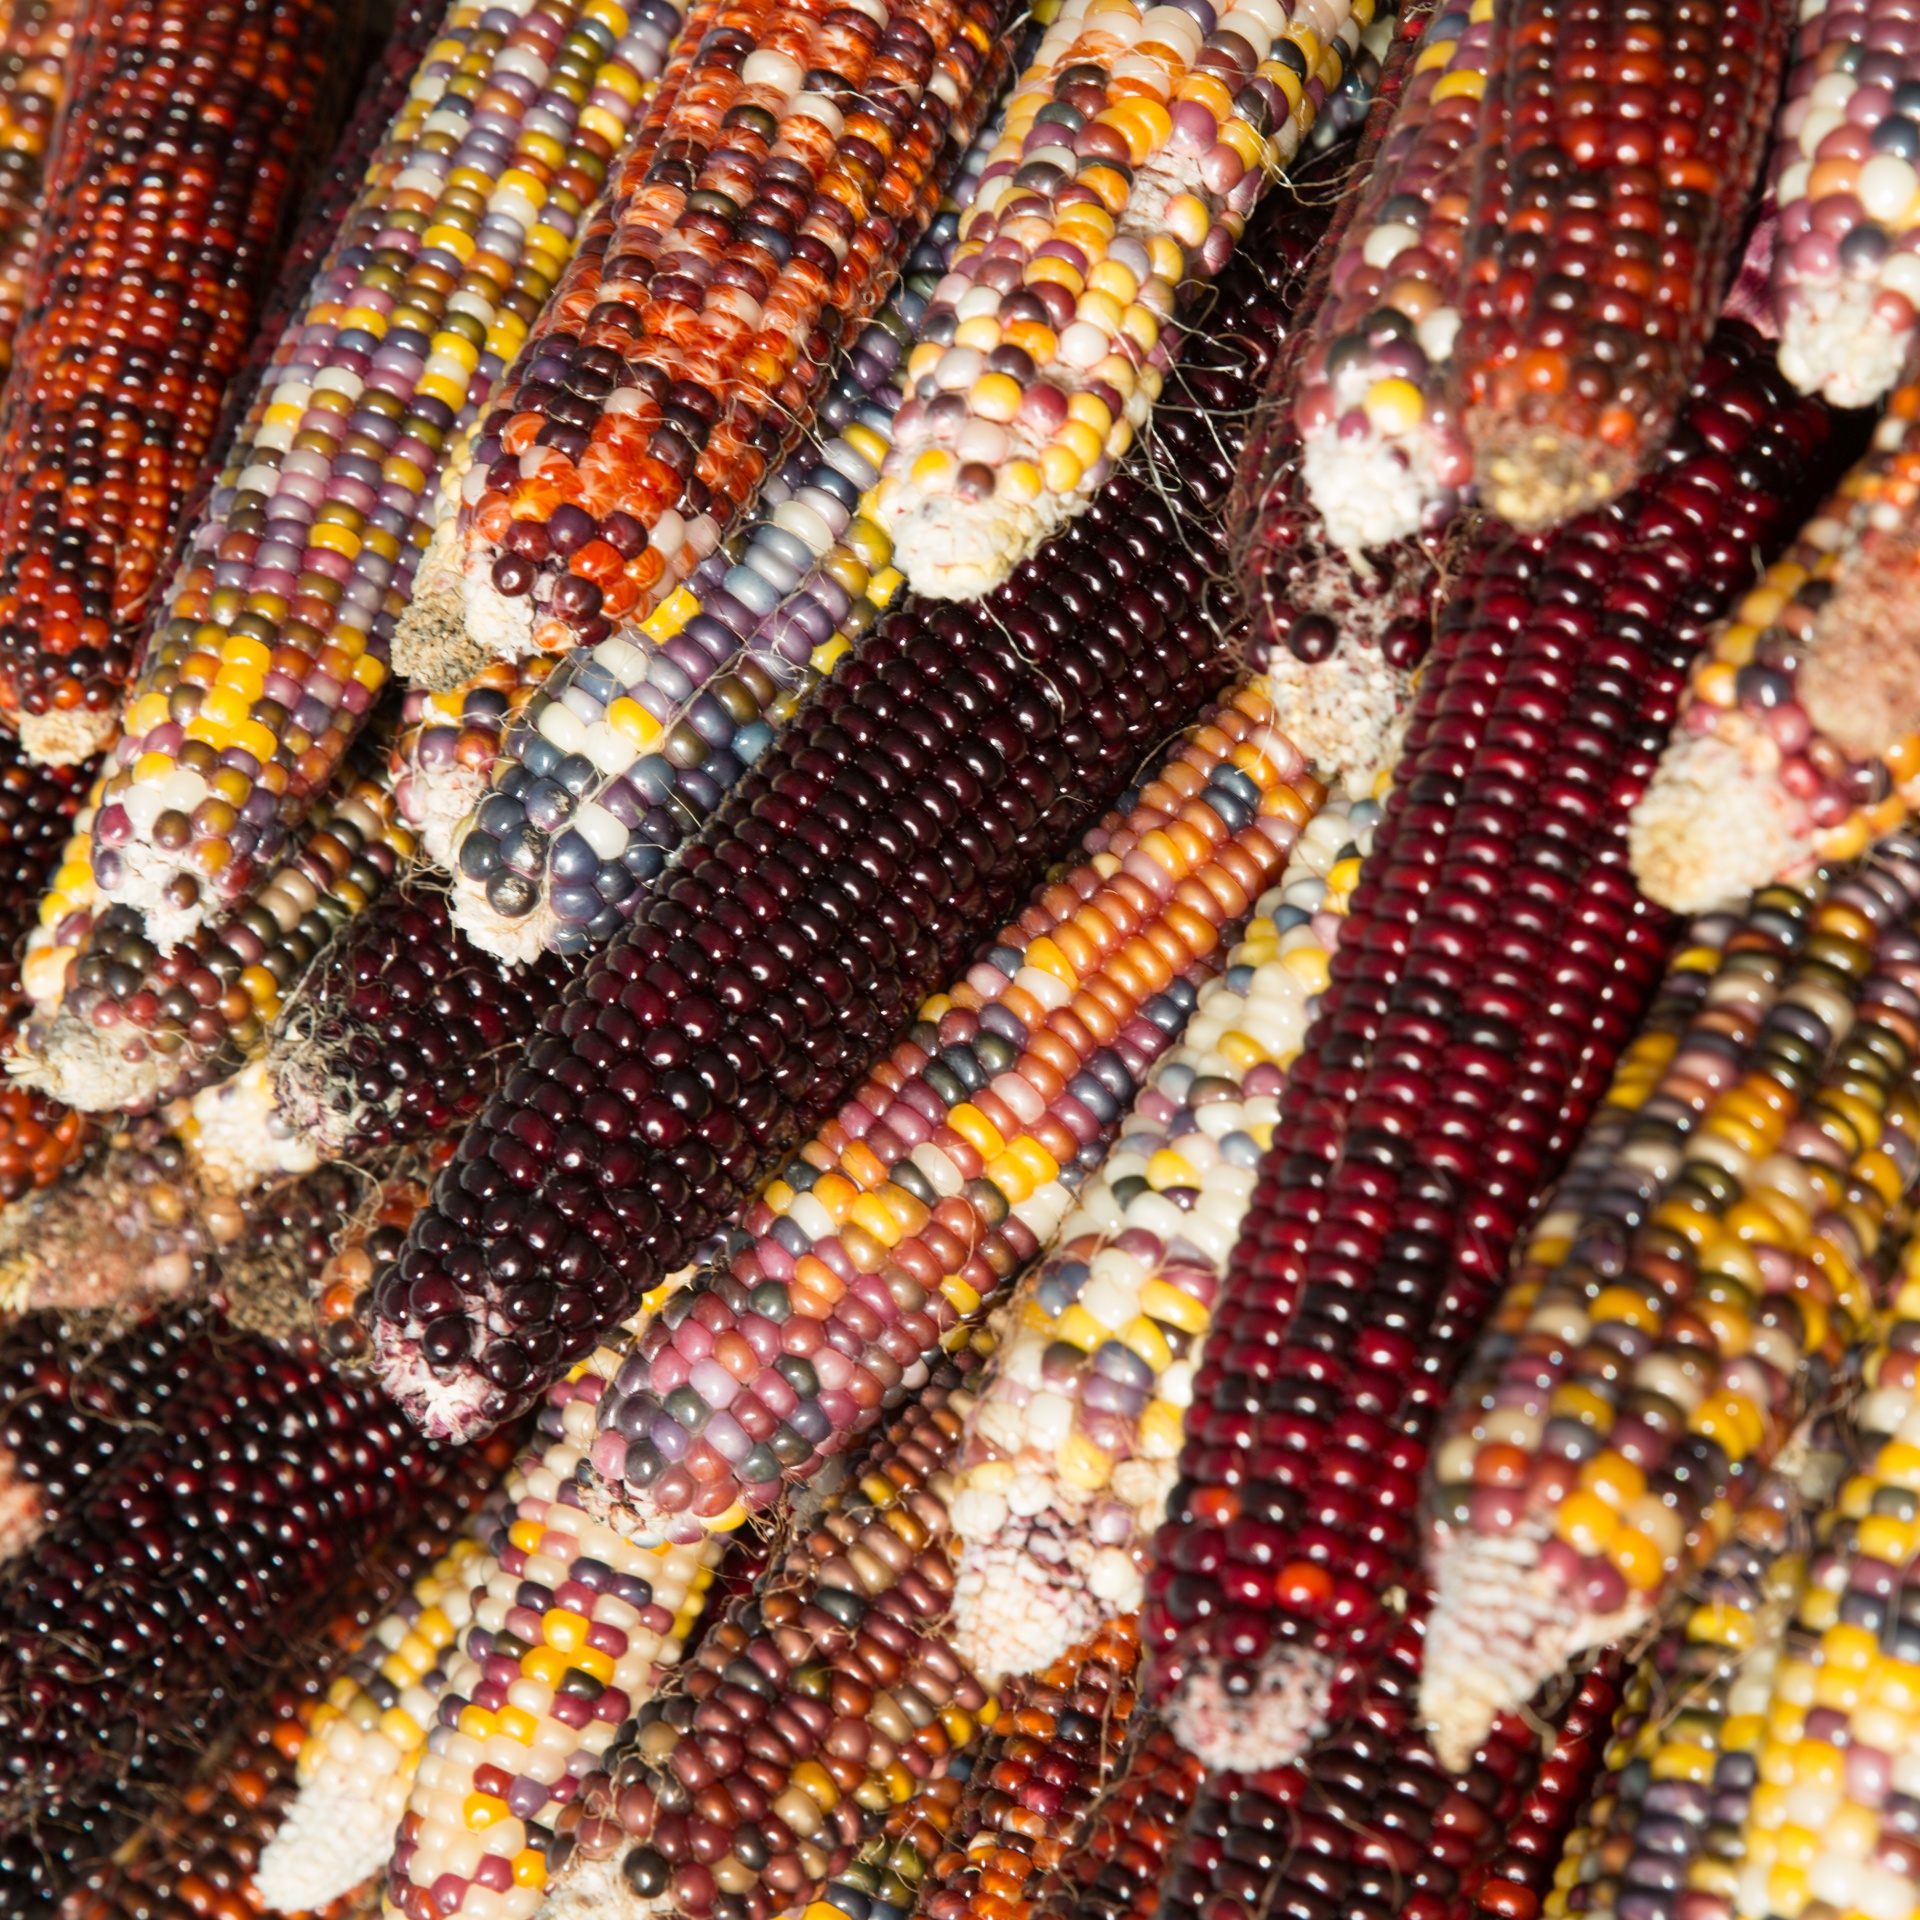 Several colorful ears of corn.